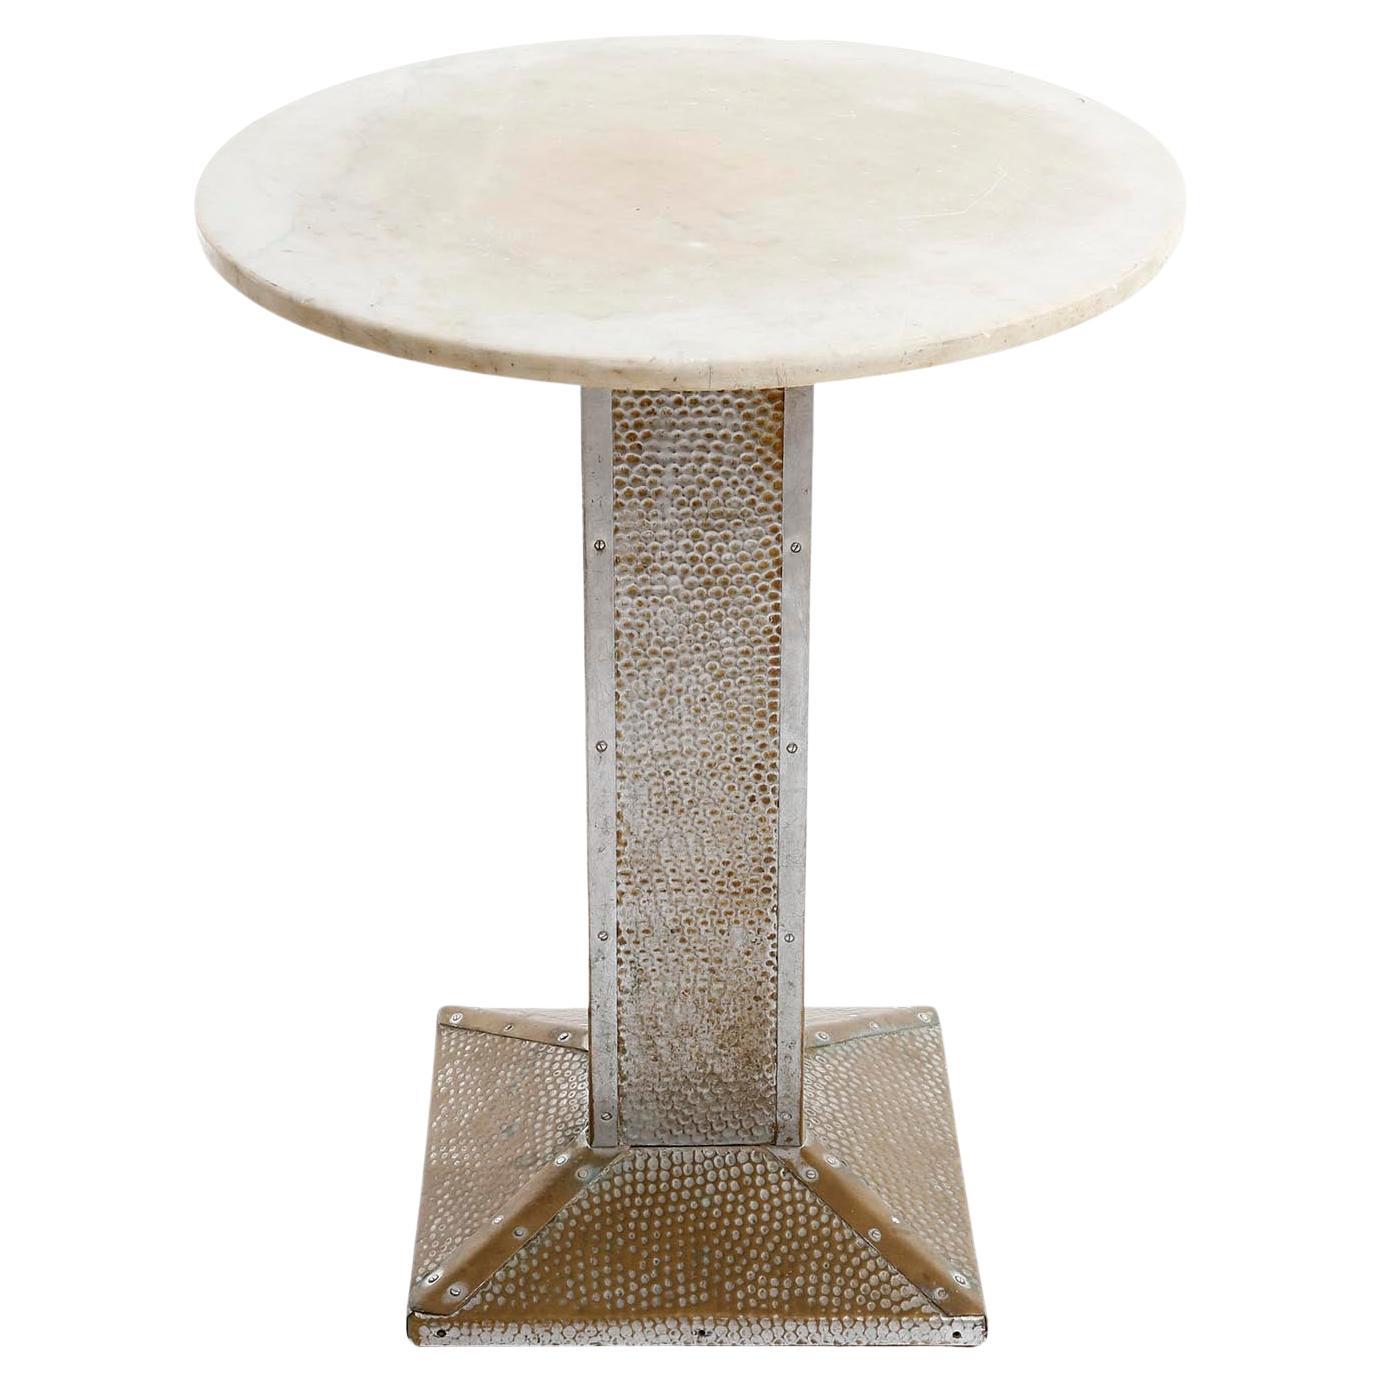 A pedestal table made of marble and a hammered and nickeled brass stand, manufactured in Vienna circa 1910.
Partly the nickel plating is no longer present and the brass underneath is visible. There is great patina on nickel, brass and marble.
The